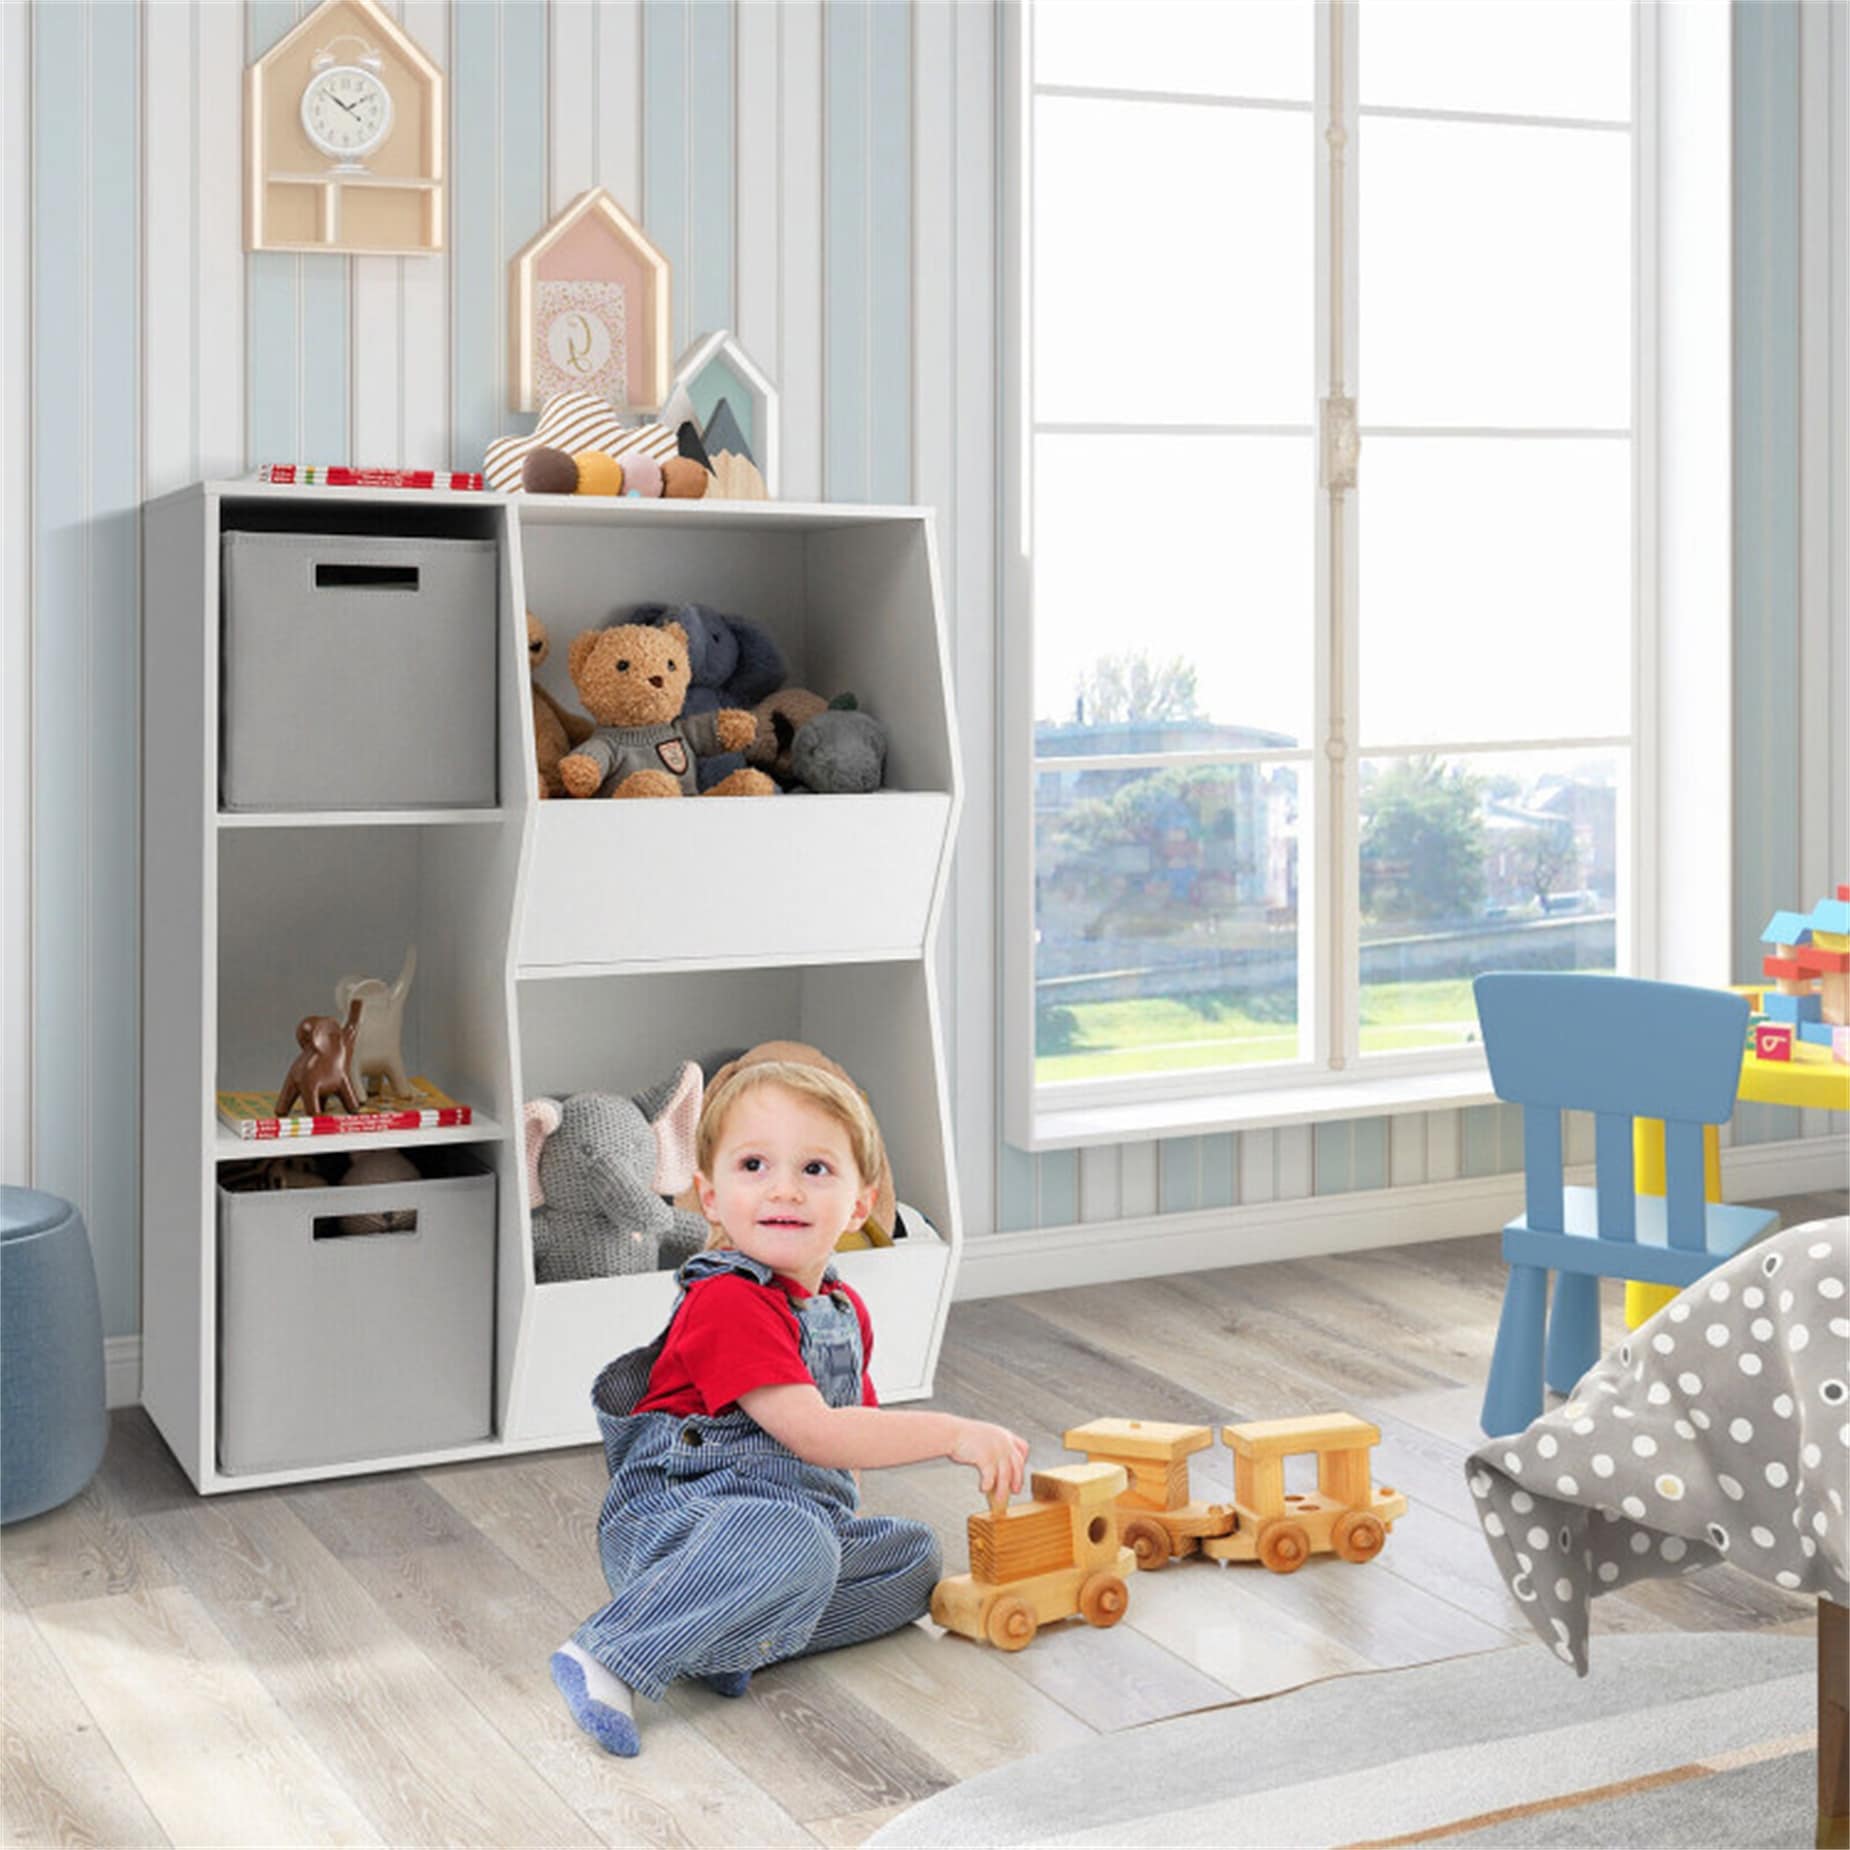 https://ak1.ostkcdn.com/images/products/is/images/direct/4f596b8f833fcc01b98d9a50e1578feae8a4de52/Kids-Toy-Storage-Cabinet-Shelf-Organizer.jpg